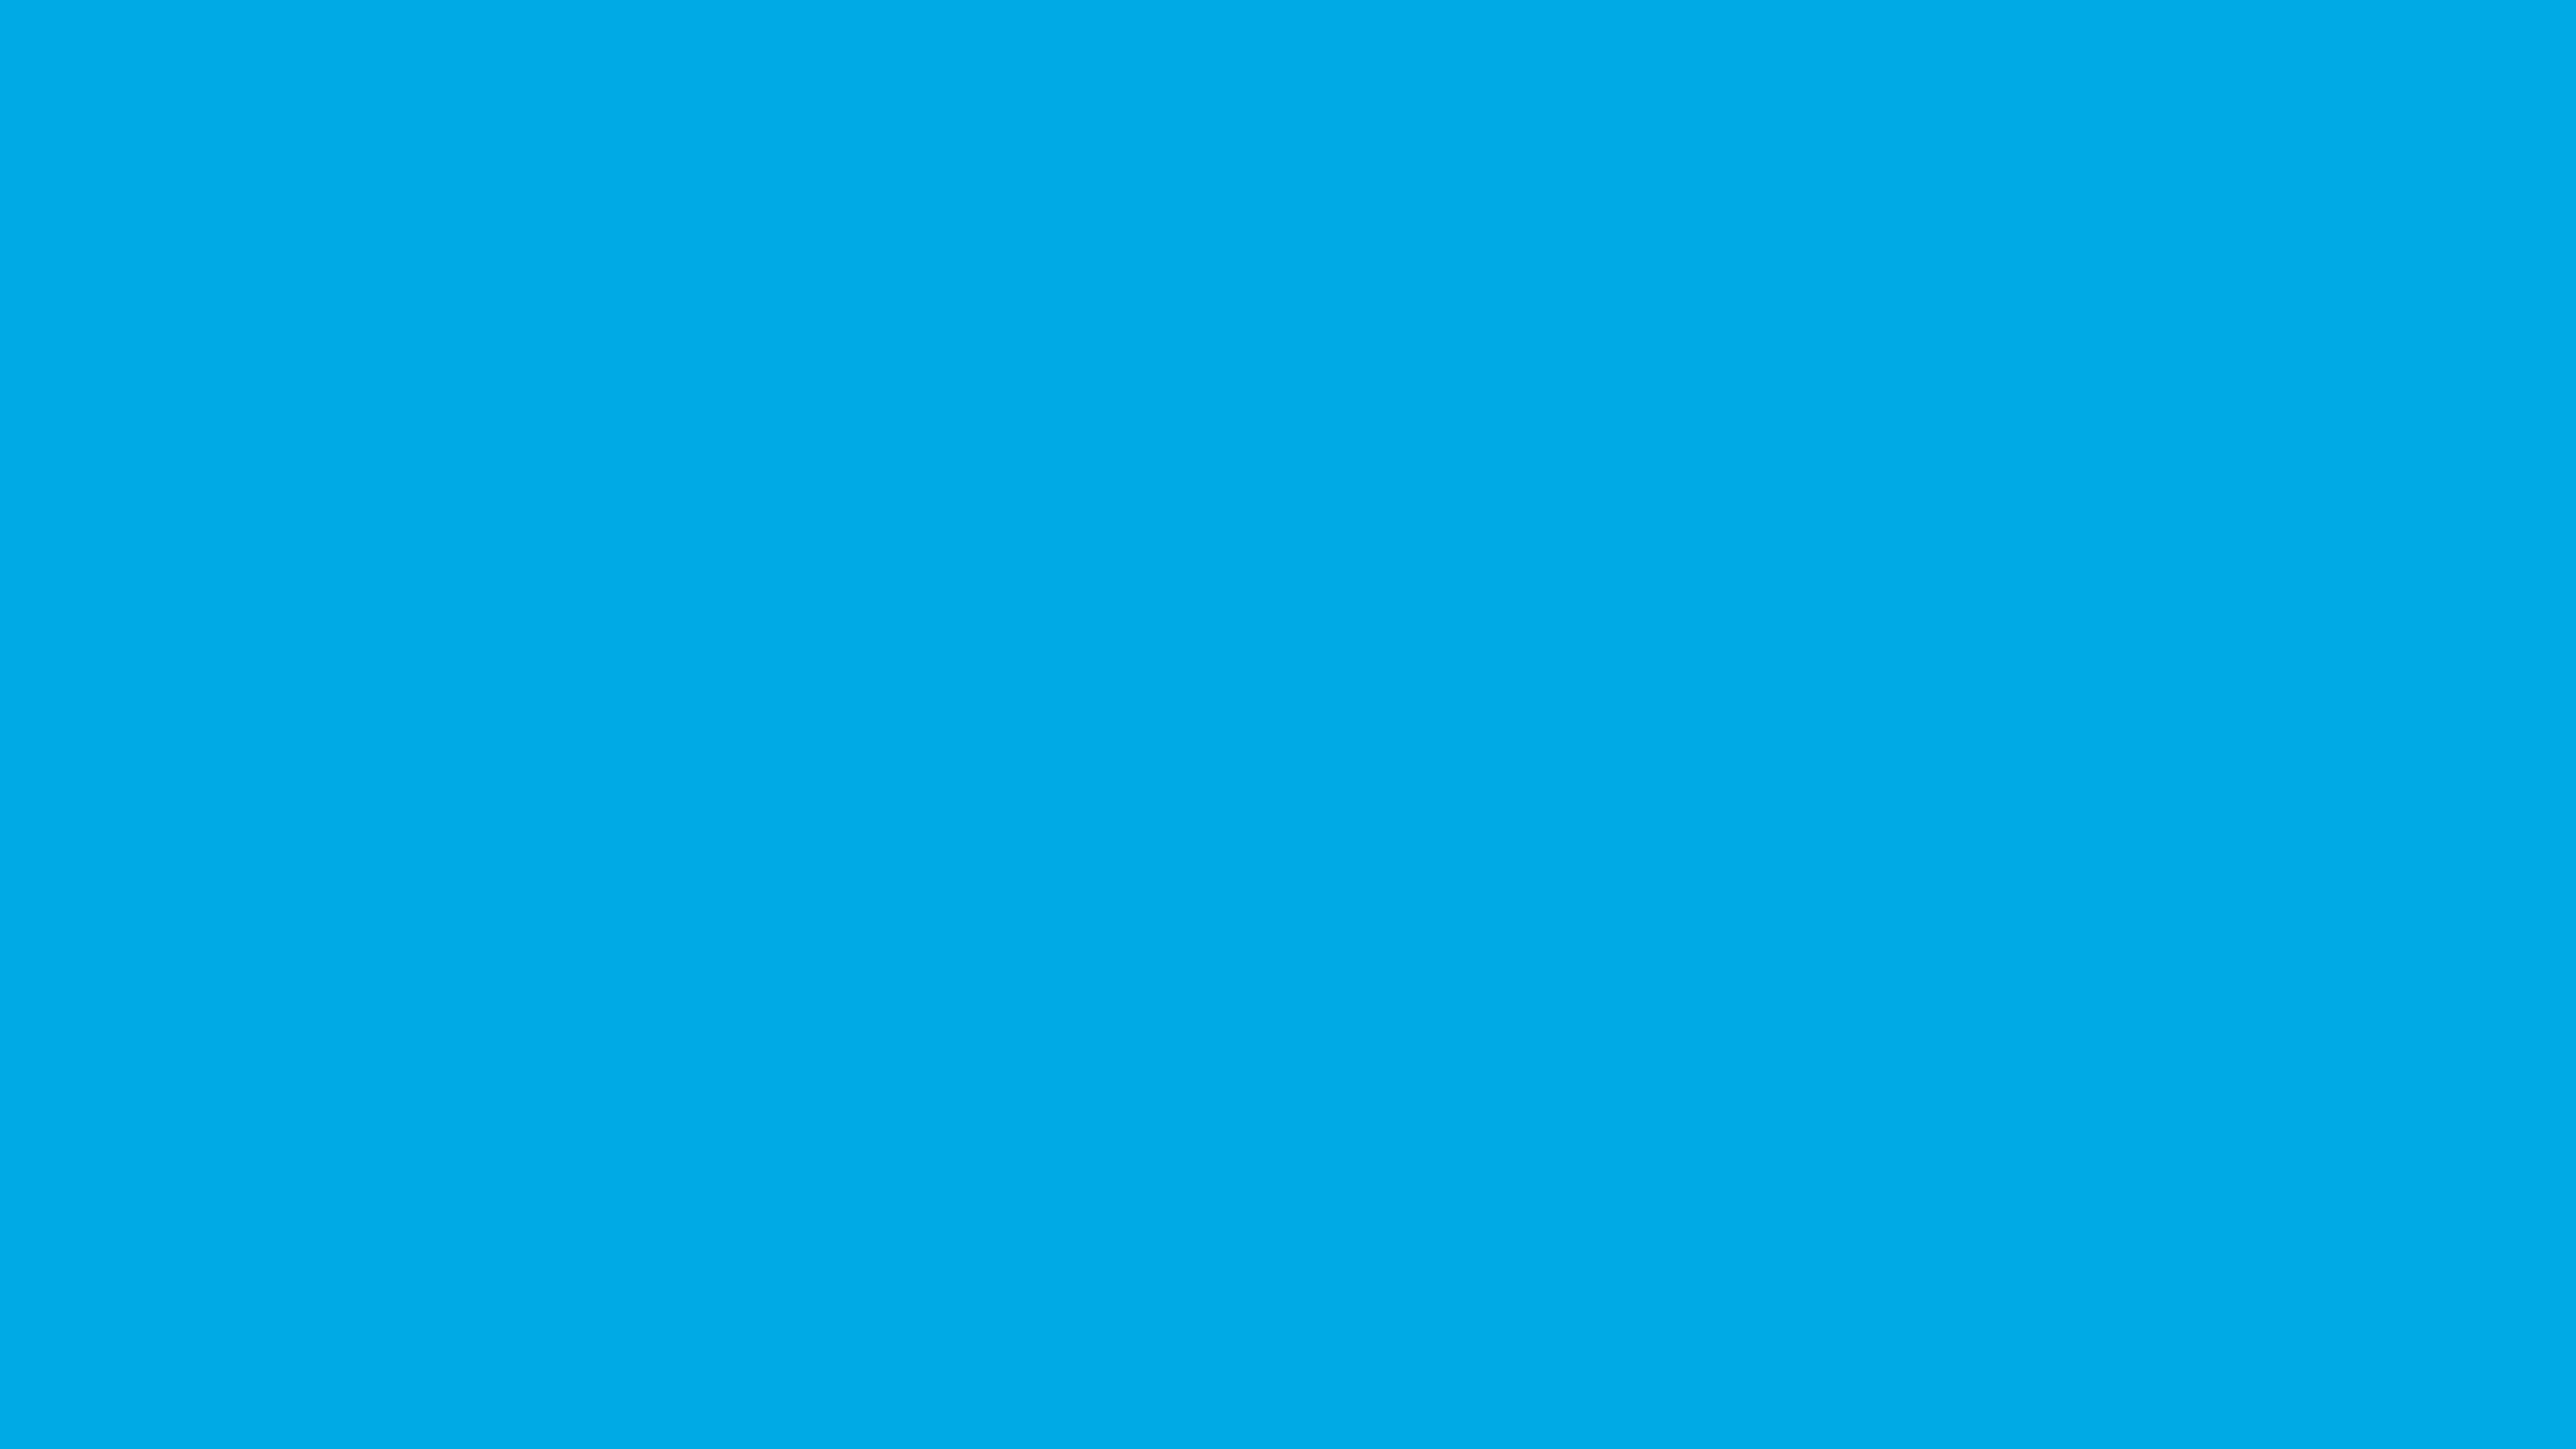 7680x4320 Spanish Sky Blue Solid Color Background